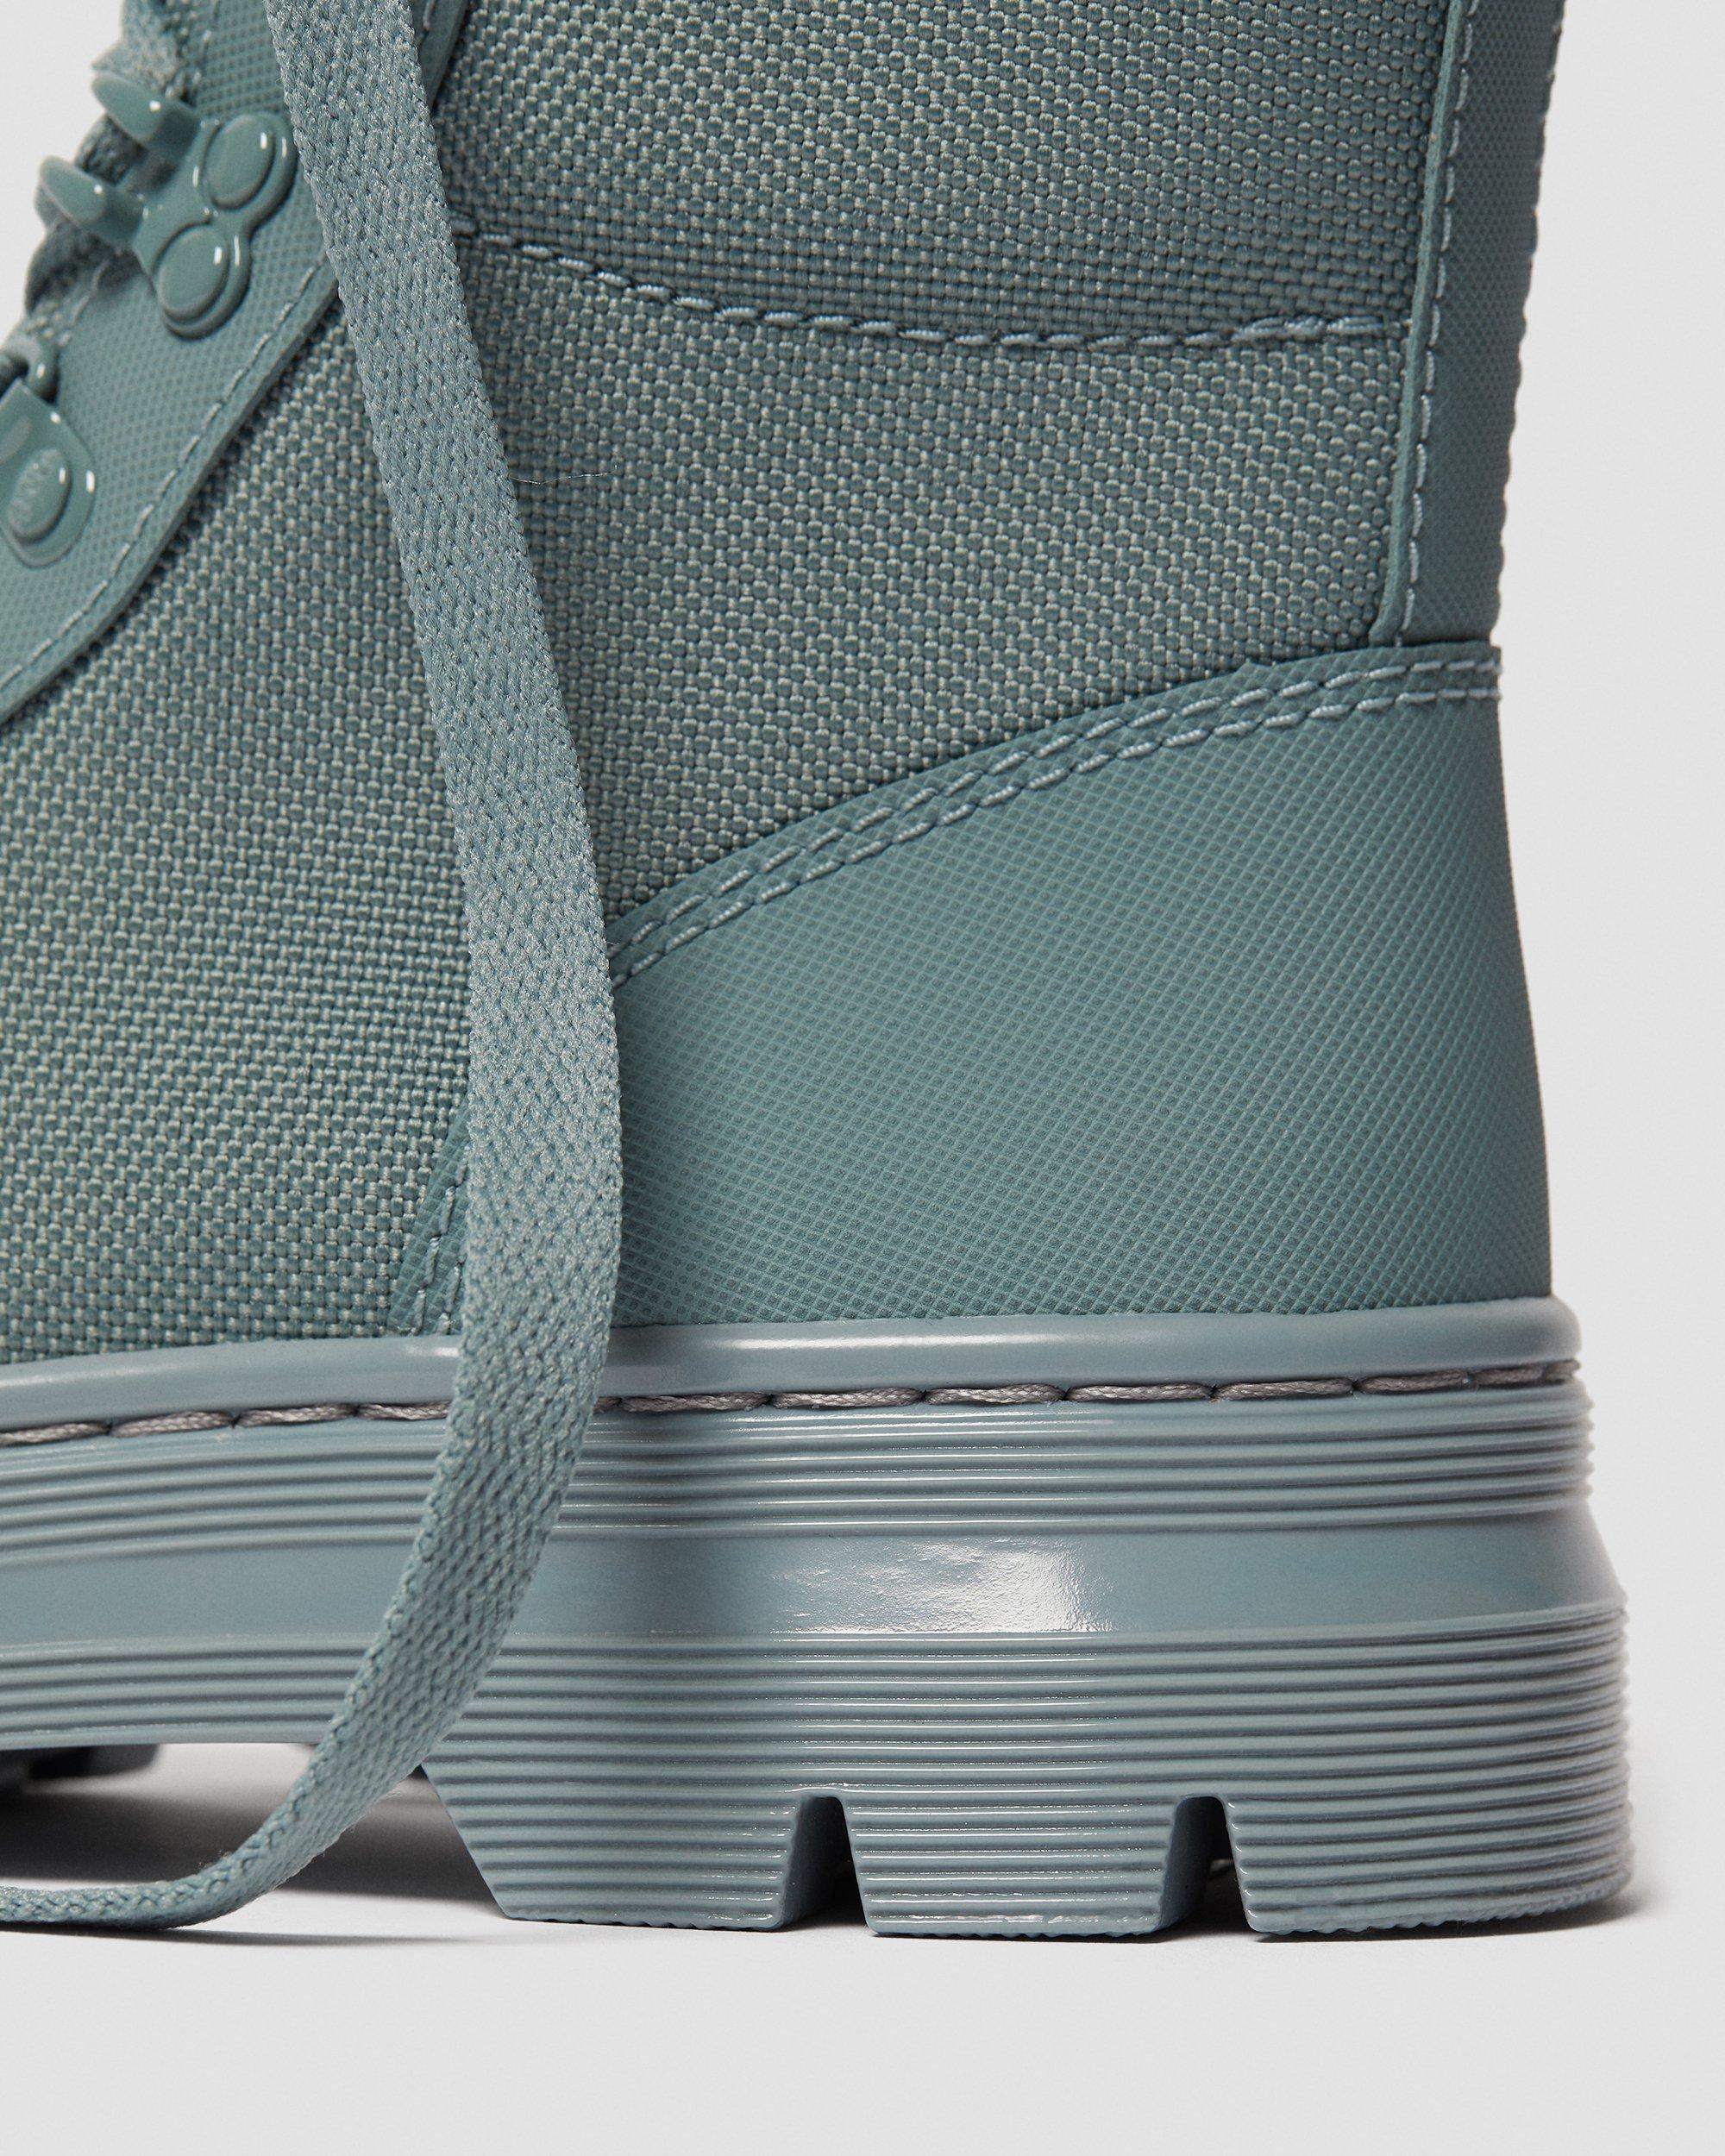 COMBS TECH UTILITY BOOTS in Teal+Grey